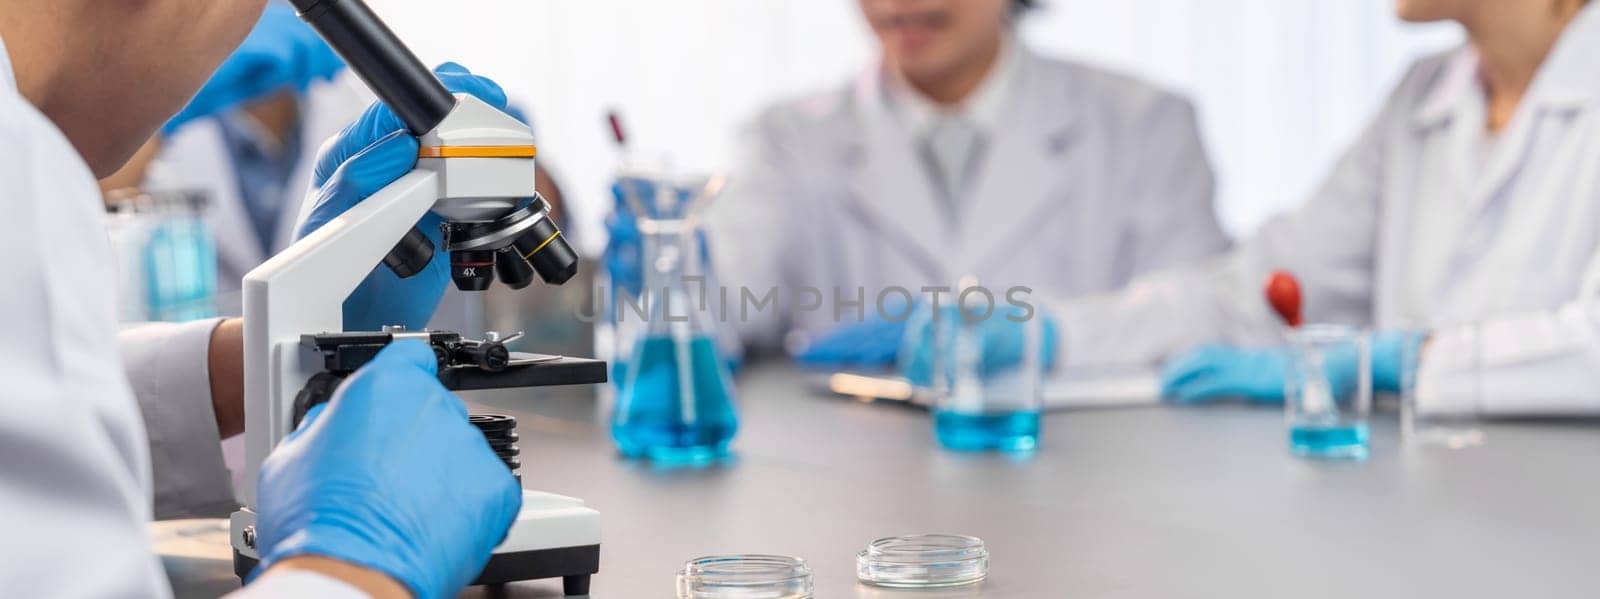 Scientist conduct chemical experiment using microscope in medical lab. Neoteric by biancoblue